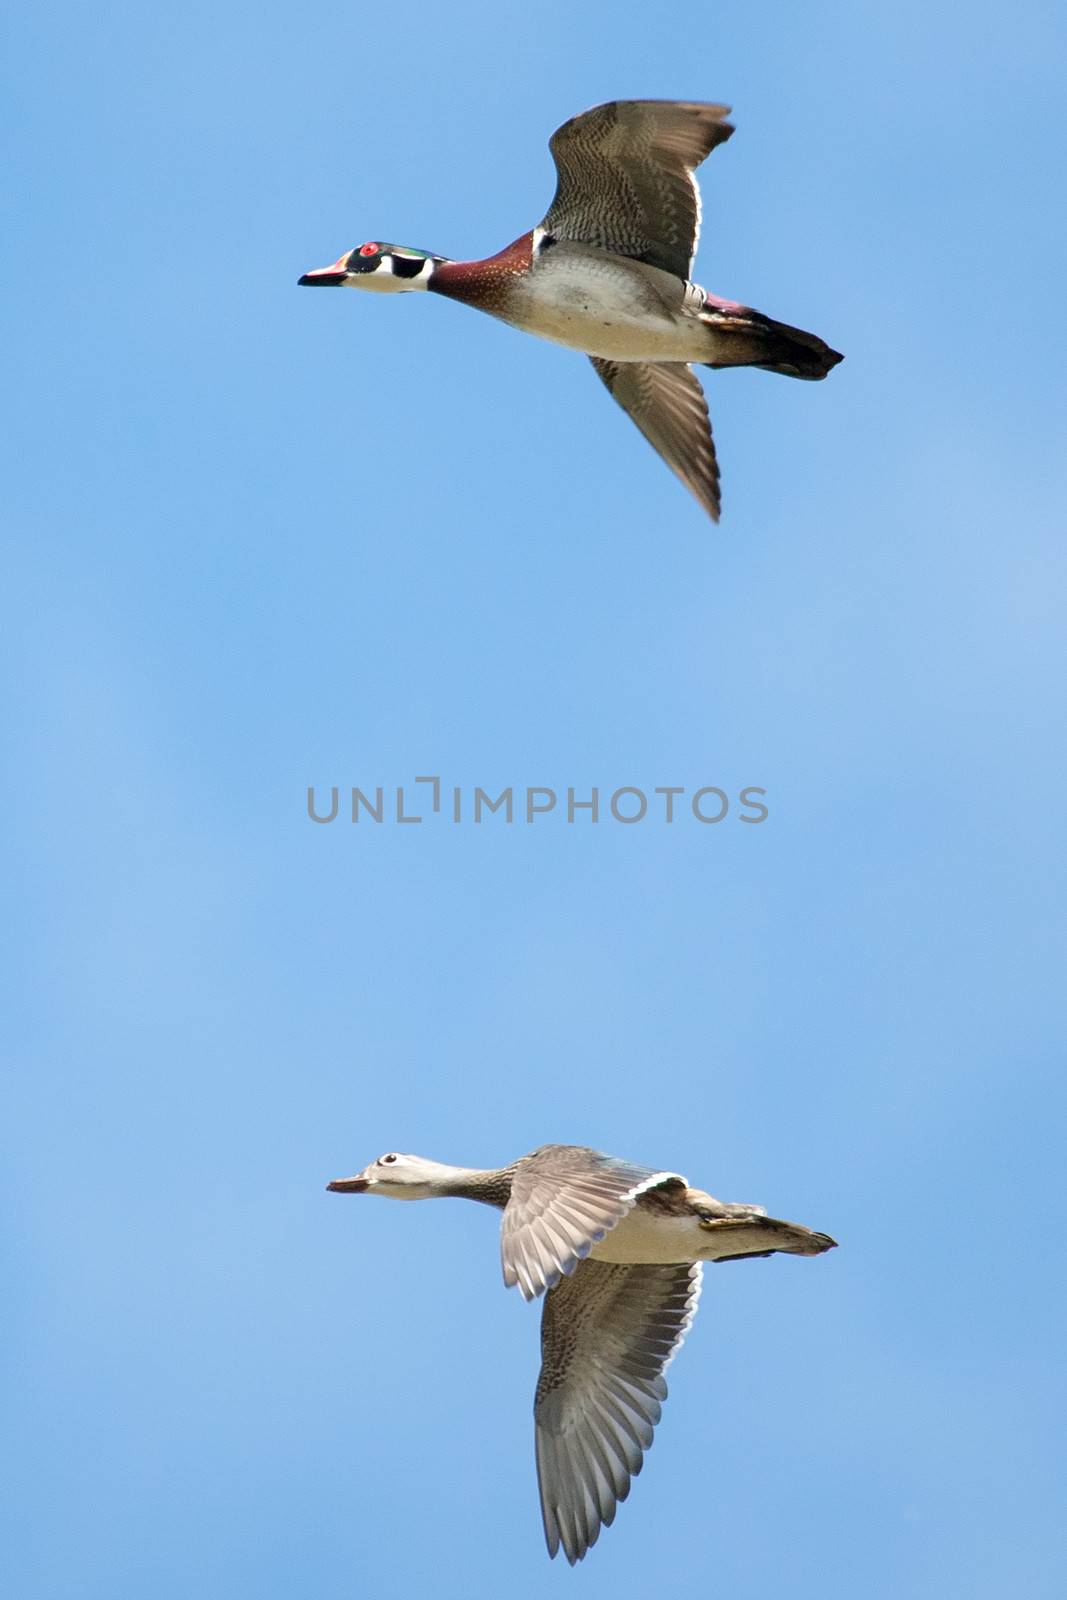 Male and Female wood ducks in flight by Coffee999